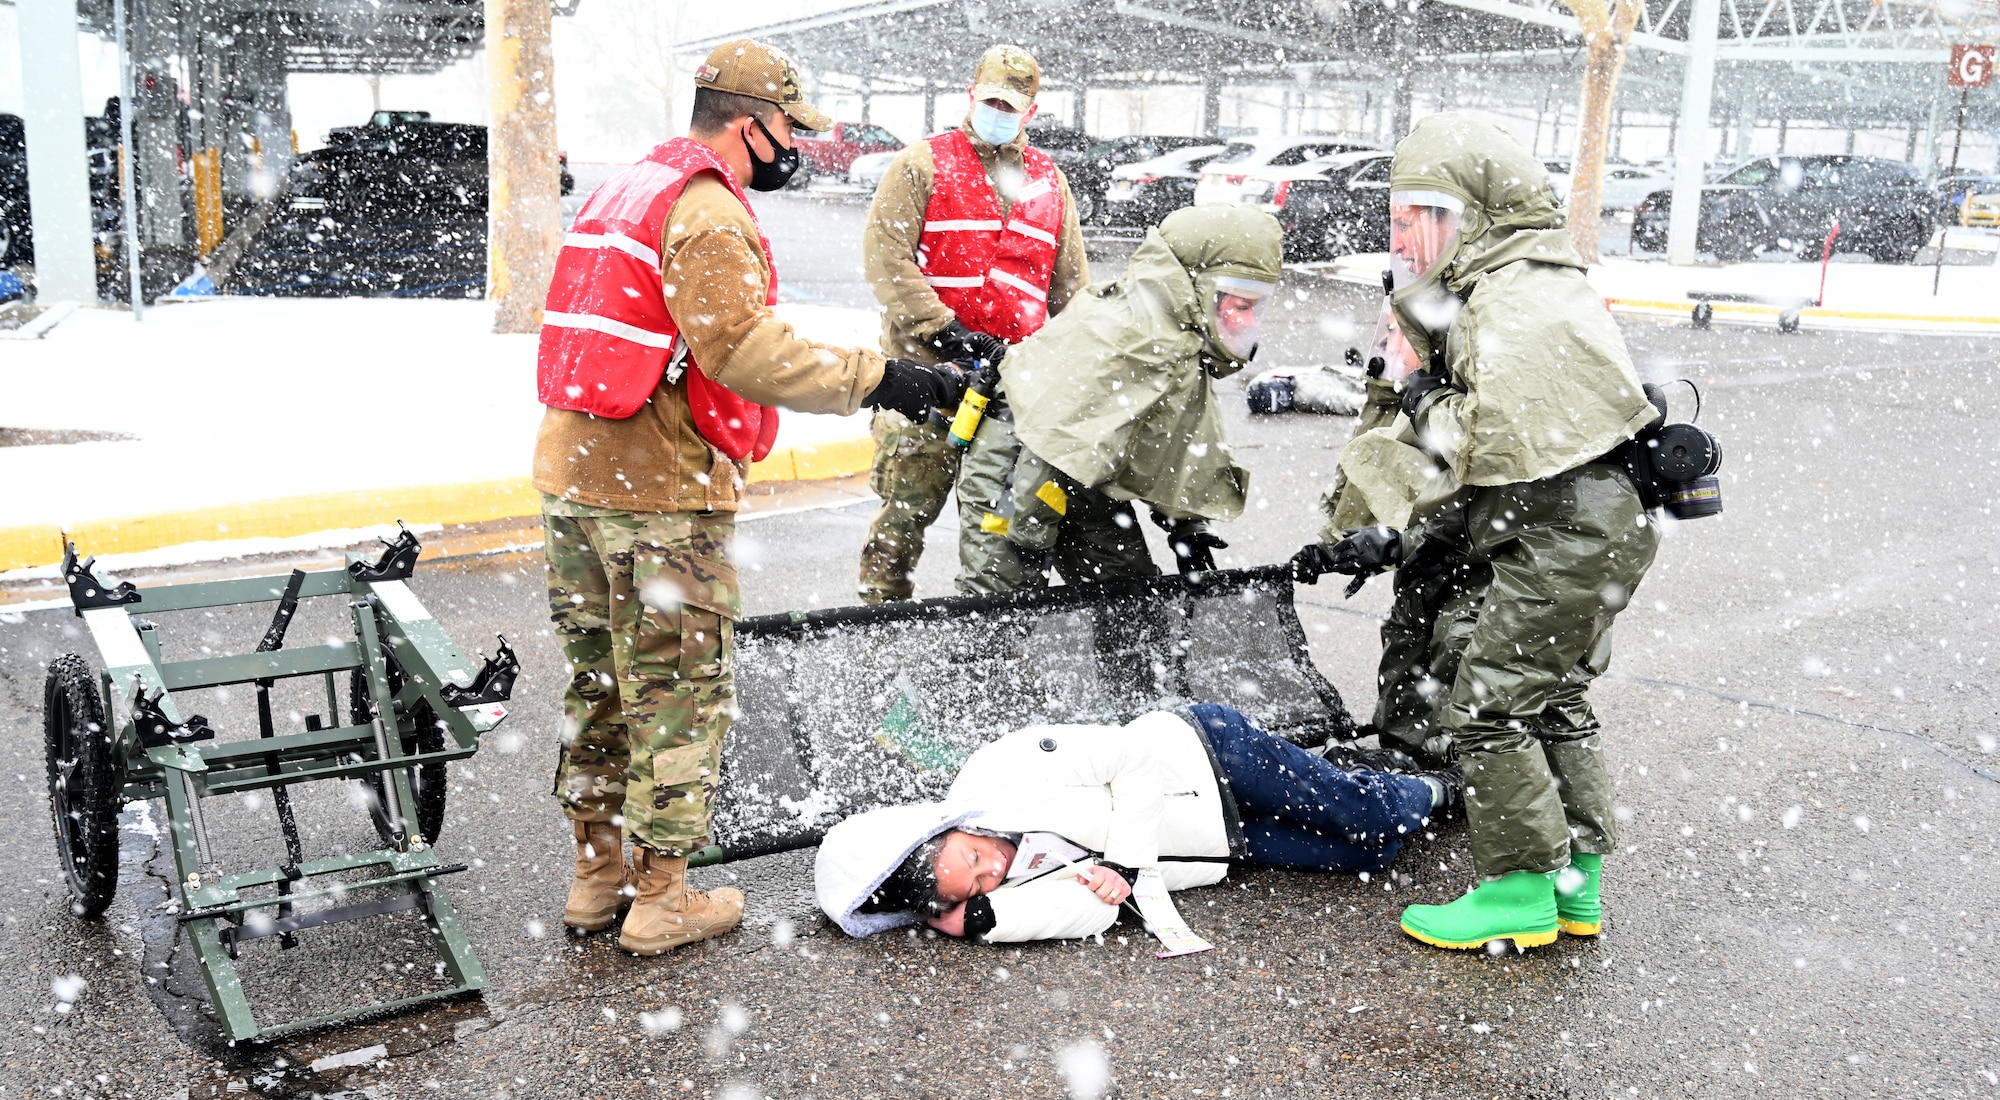 Medics lifts casualty onto litter